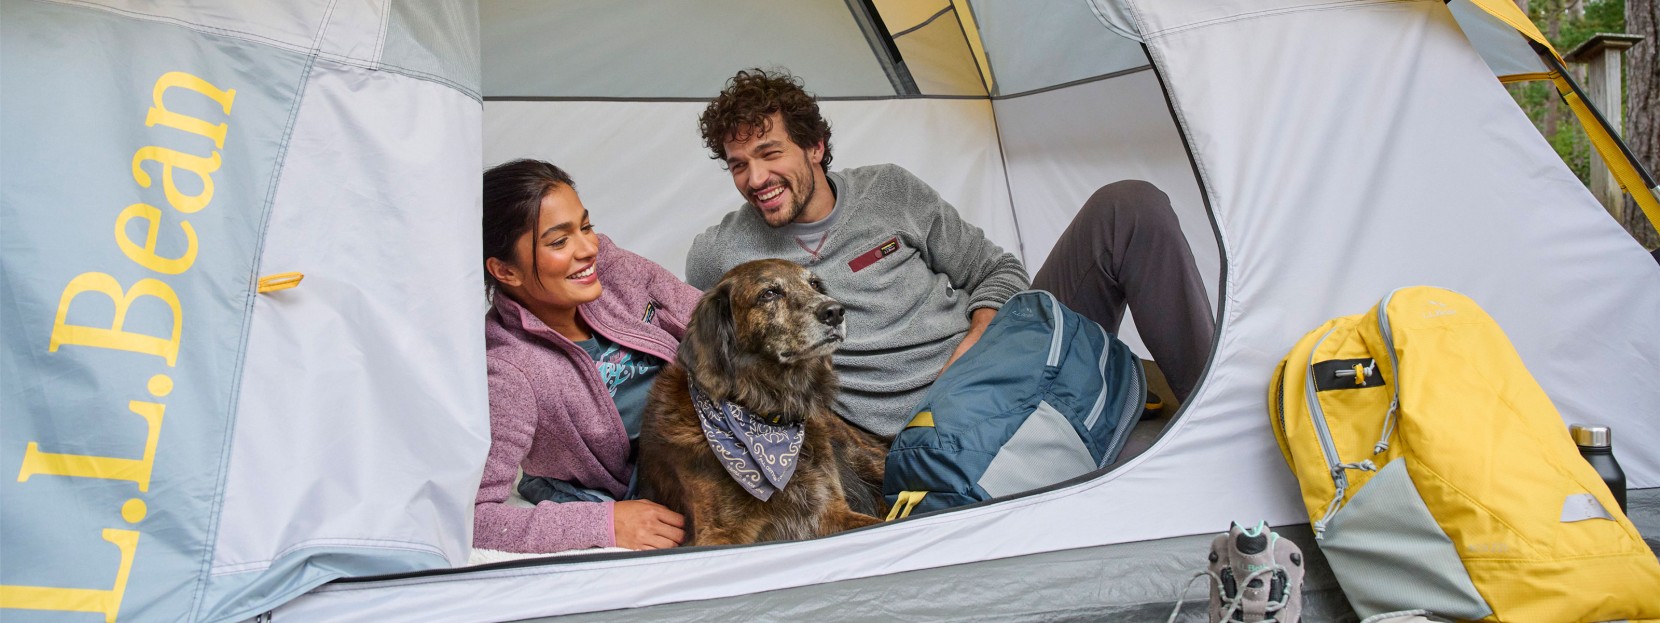 A close-up of a couple and a dog in a tent.